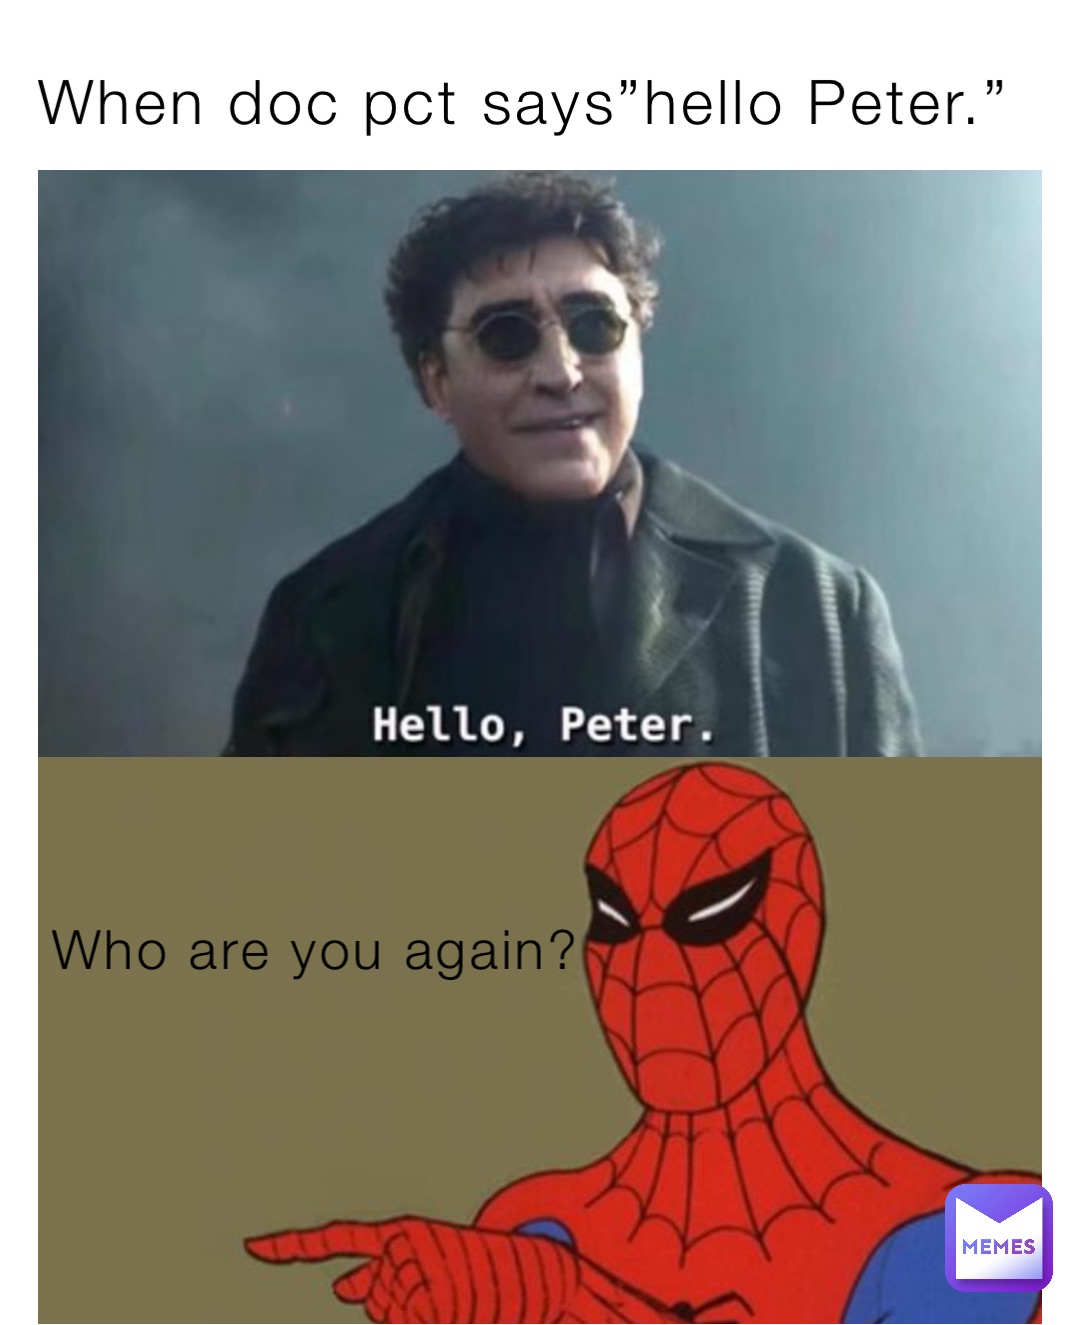 When doc pct says”hello Peter.” Who are you again?